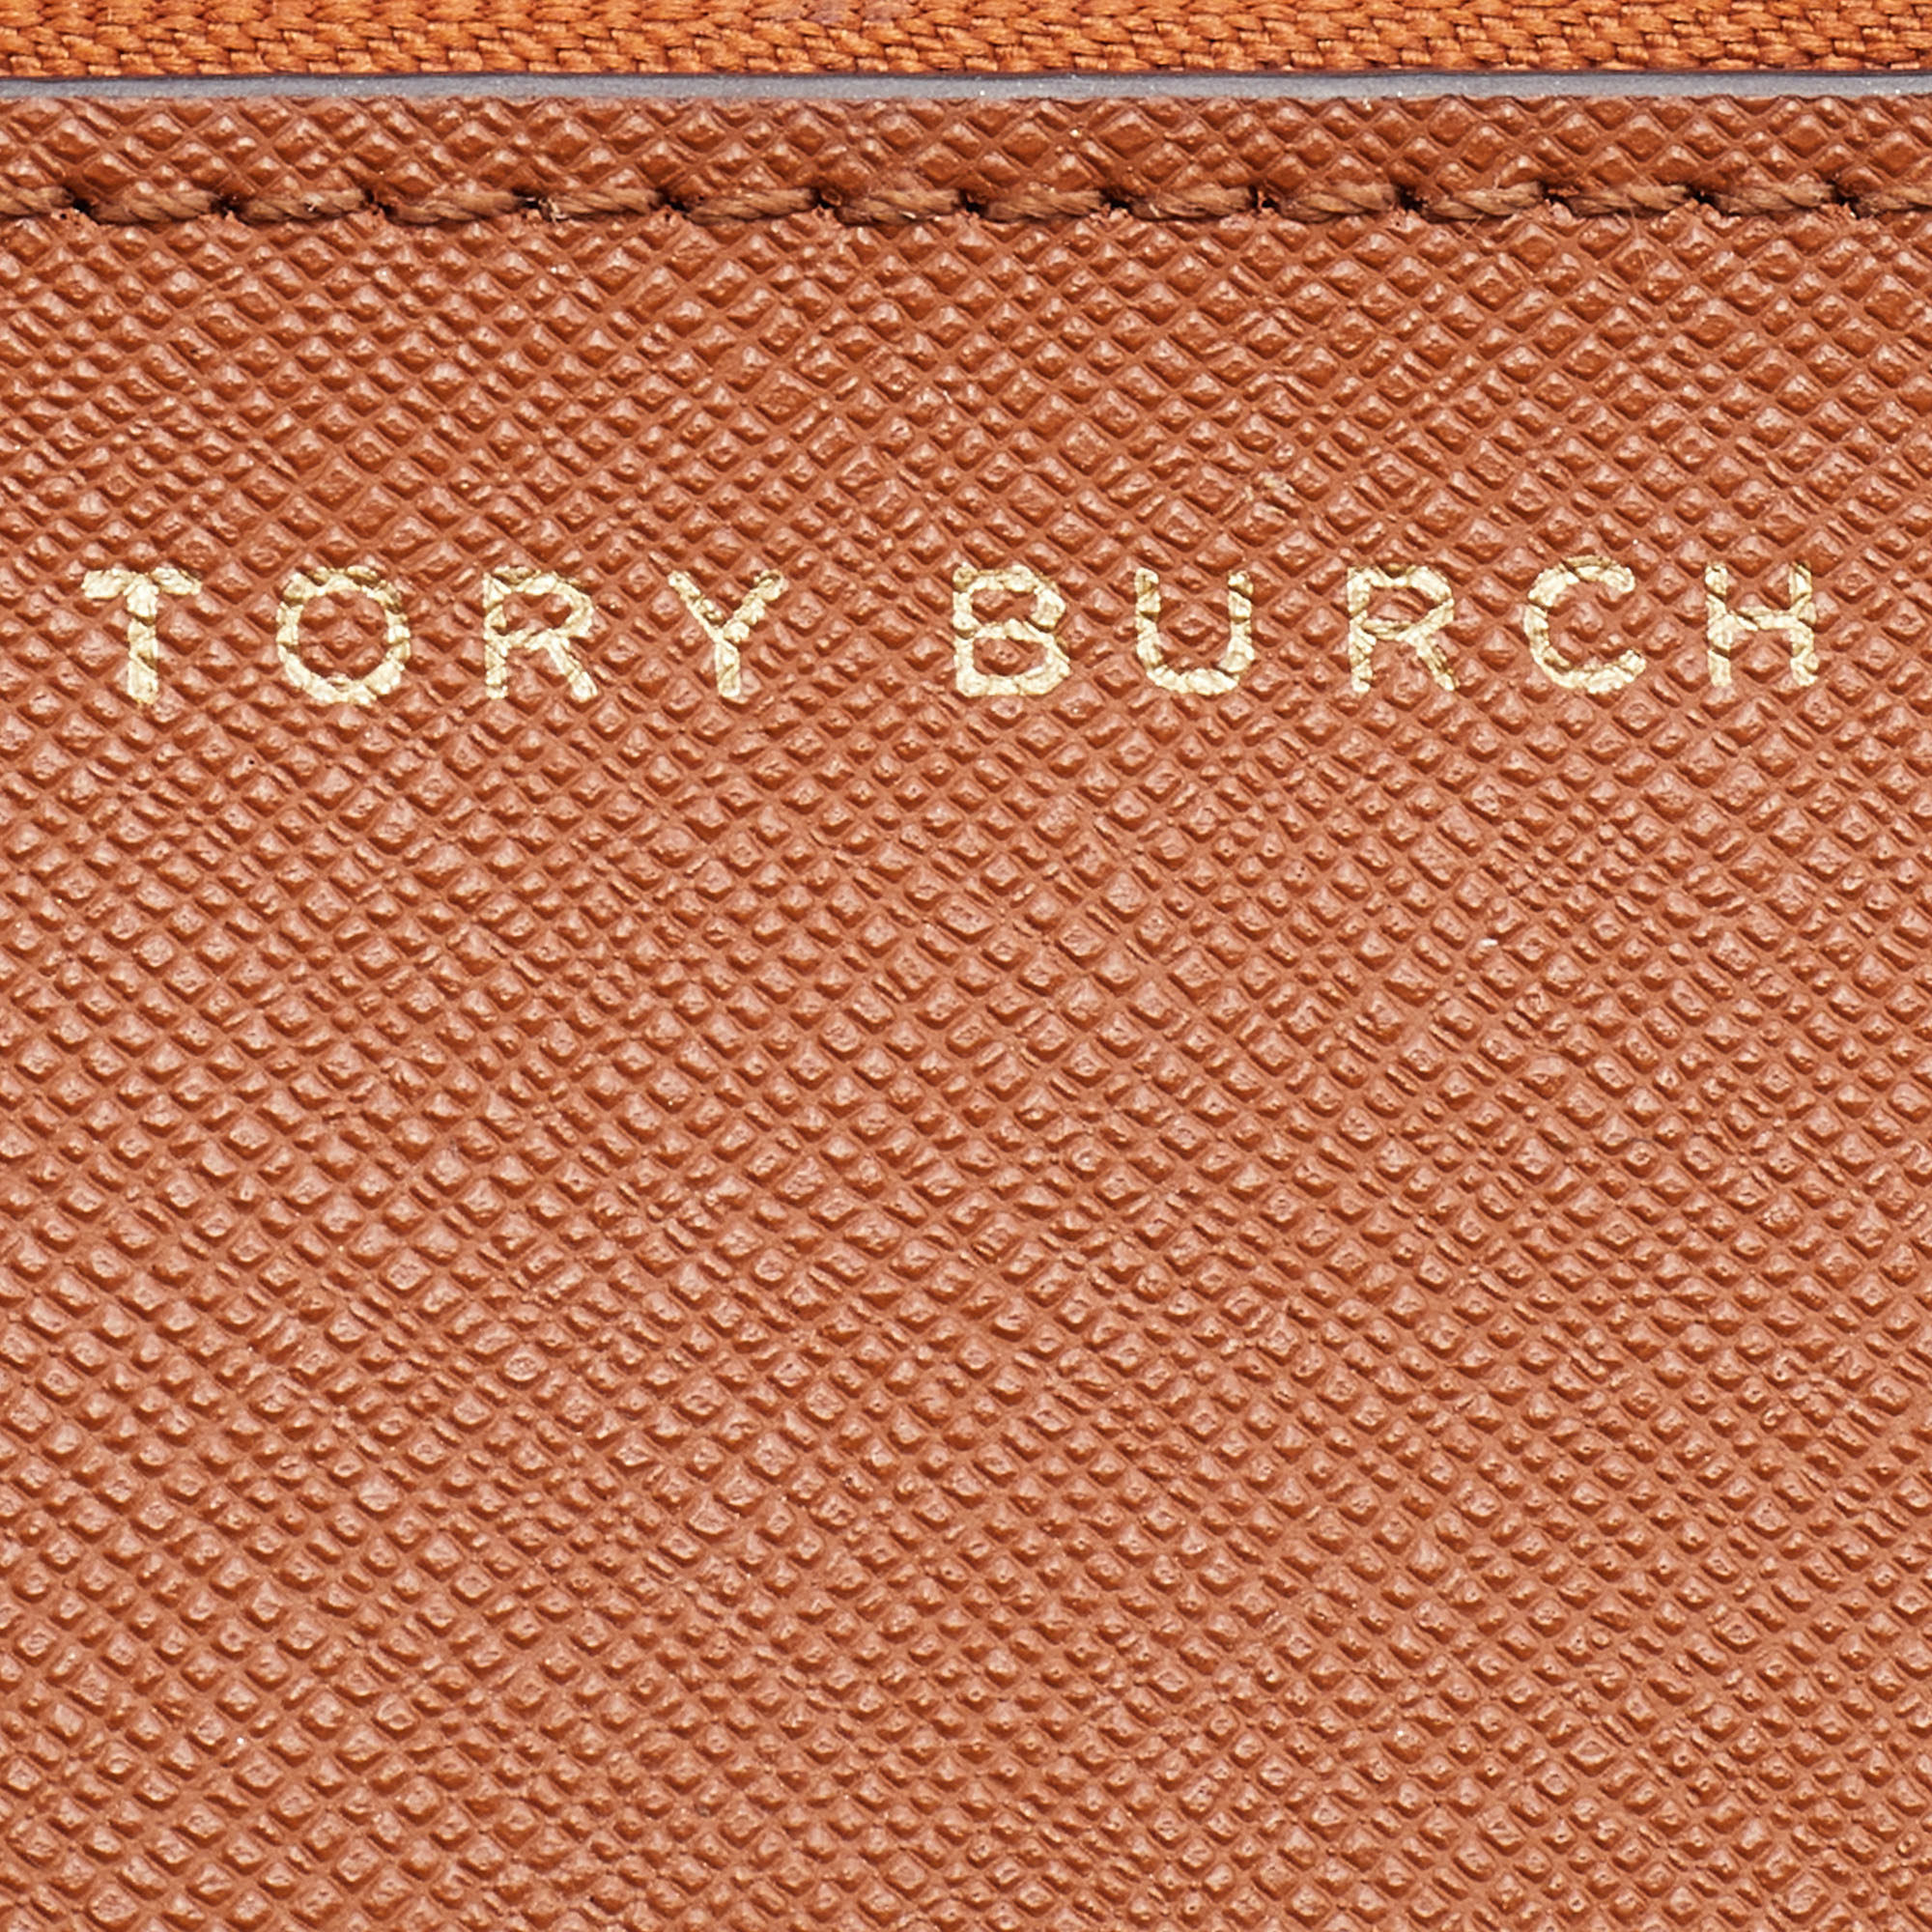 Tory Burch Brown Saffiano Leather Miller Top Zip Card Case